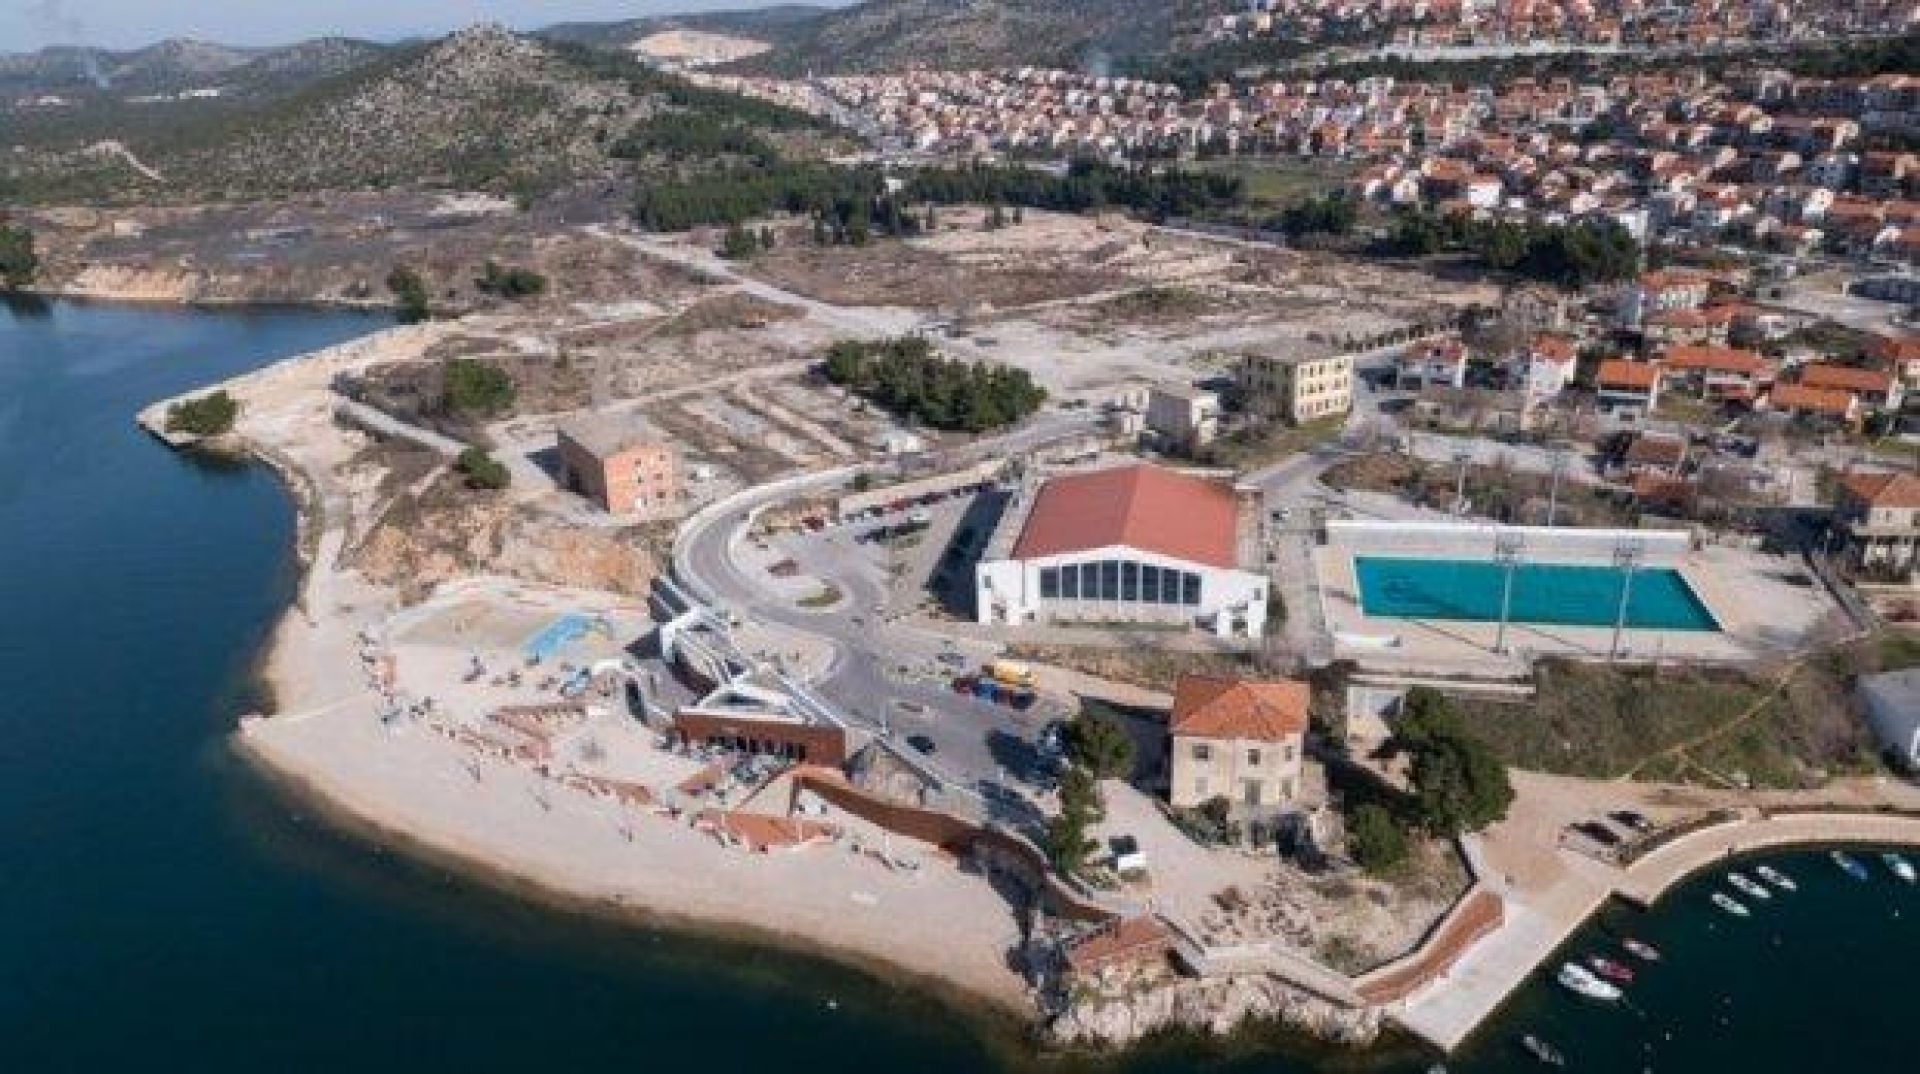 Phase 2 of the Batižele project: The cooperation between the City of Šibenik, the Republic of Croatia and the EBRD continues